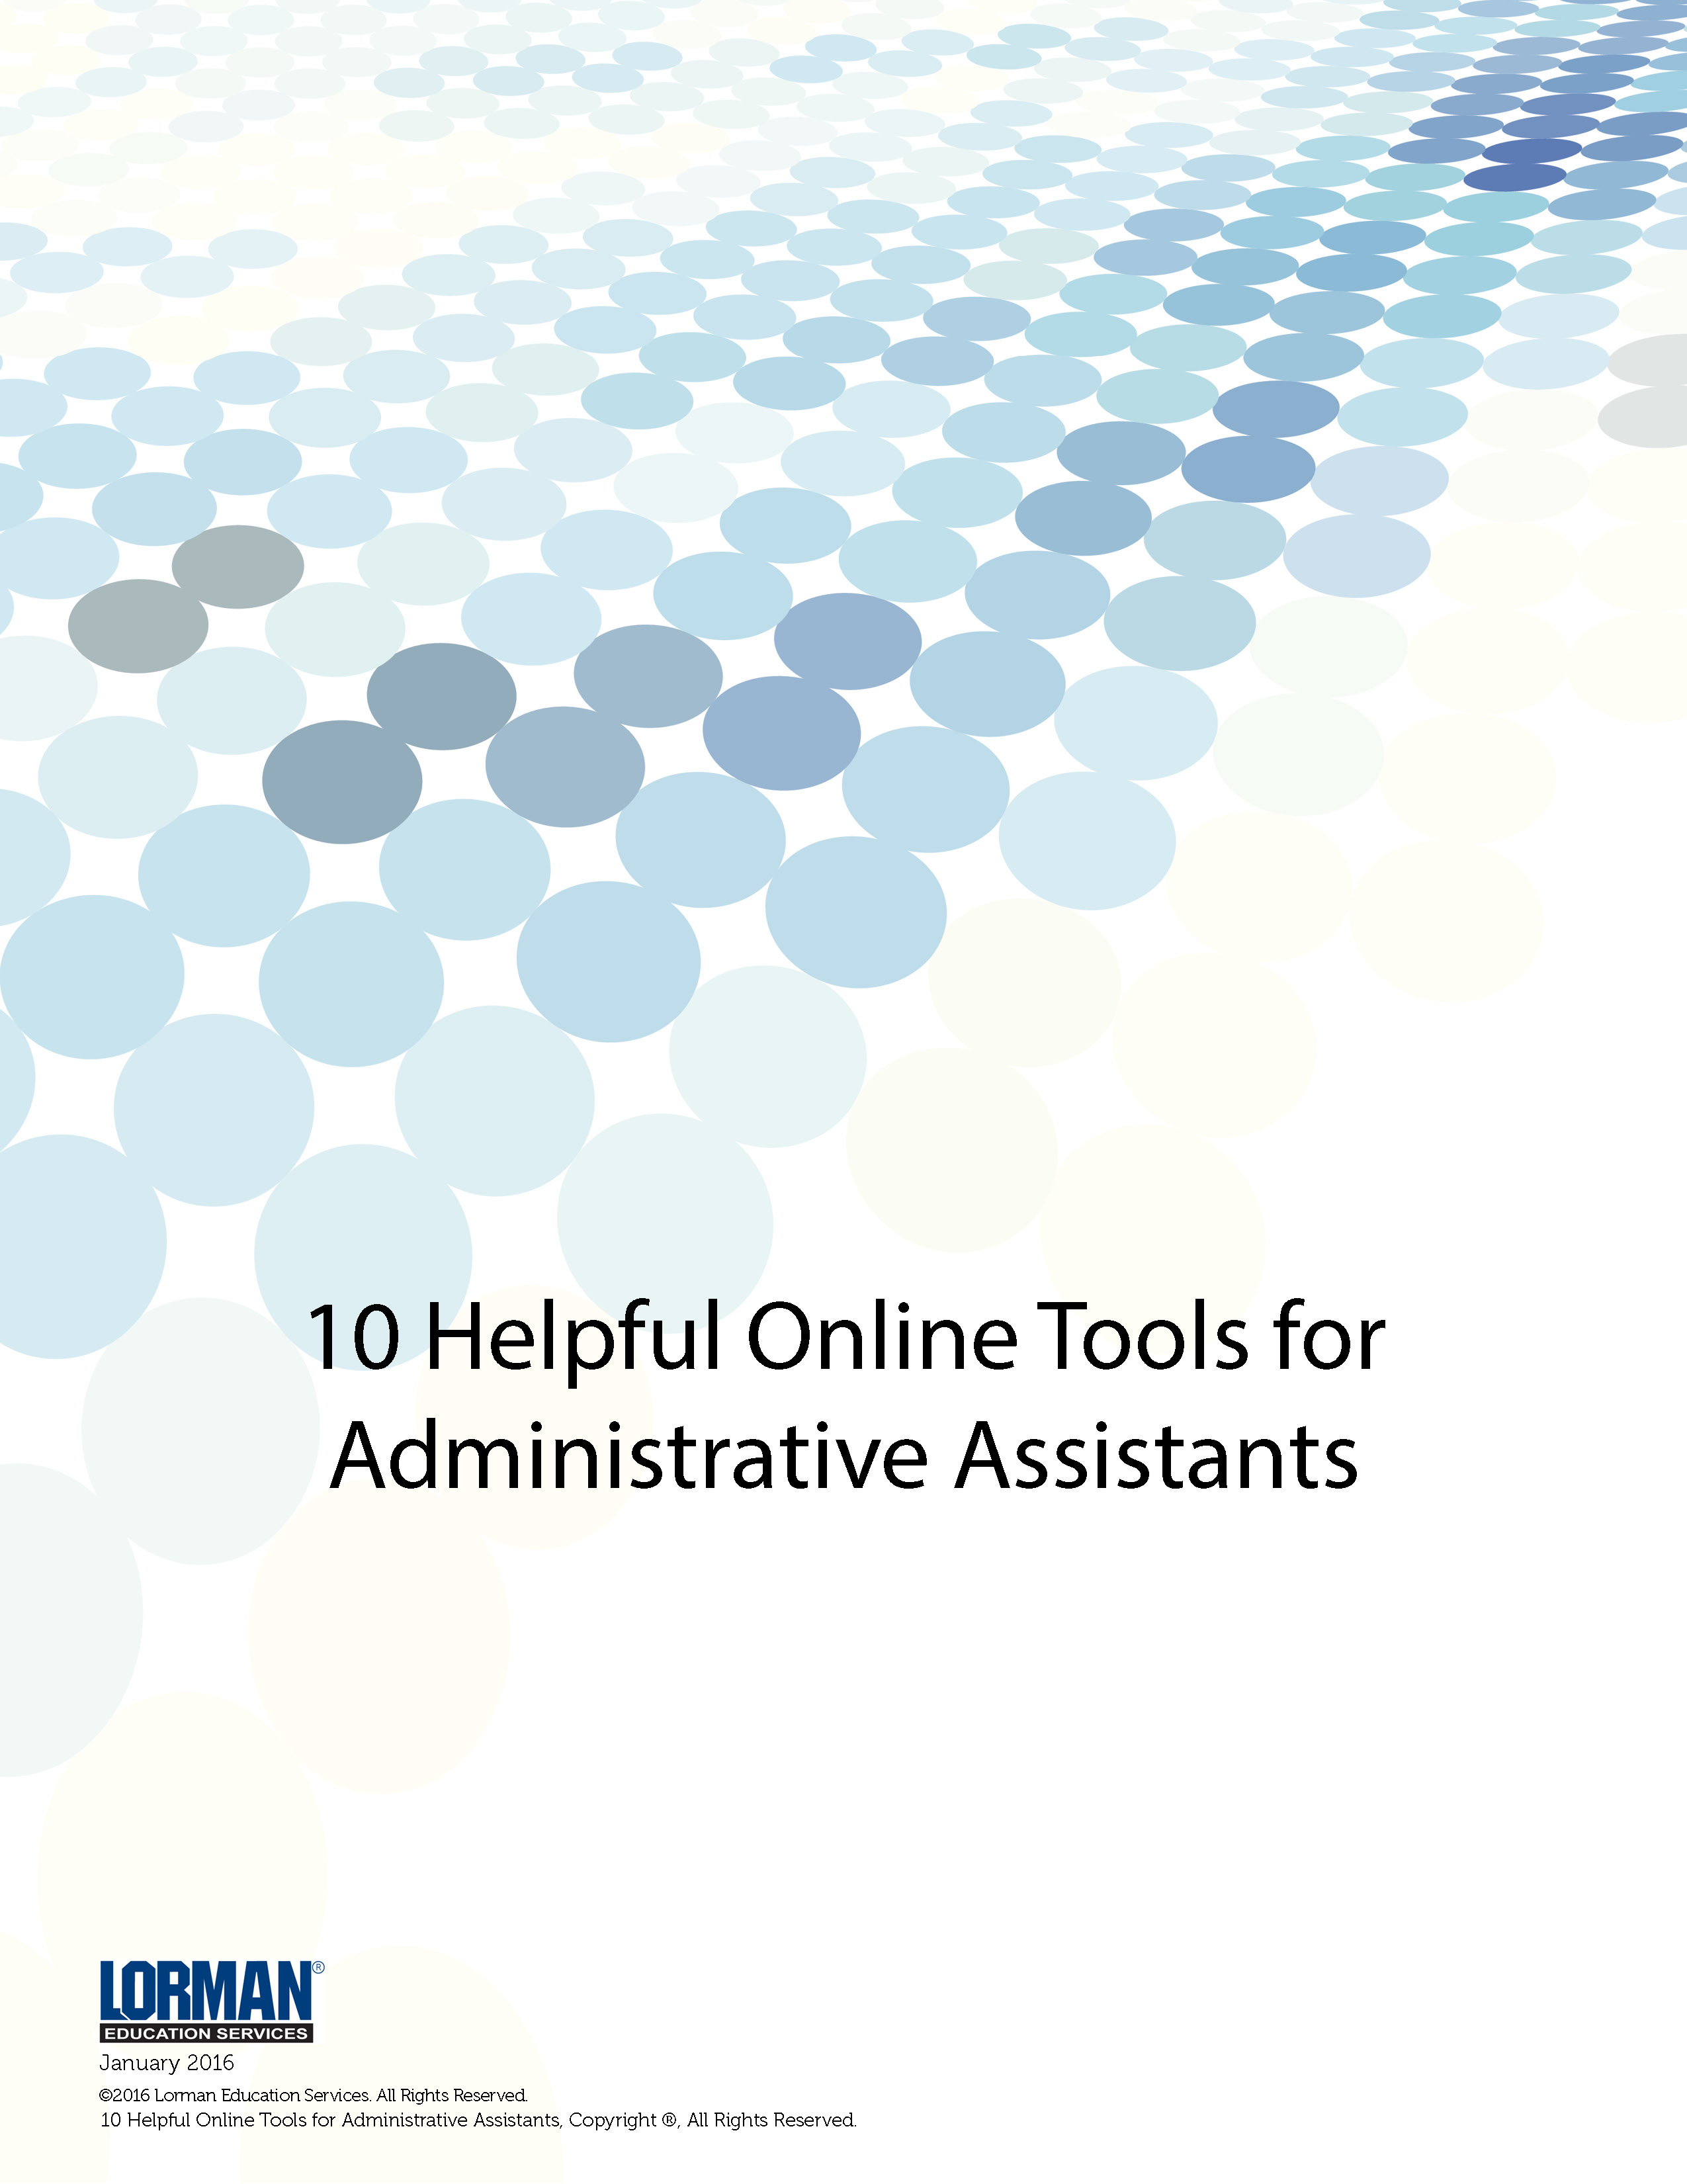 10 Helpful Online Tools for Administrative Assistants